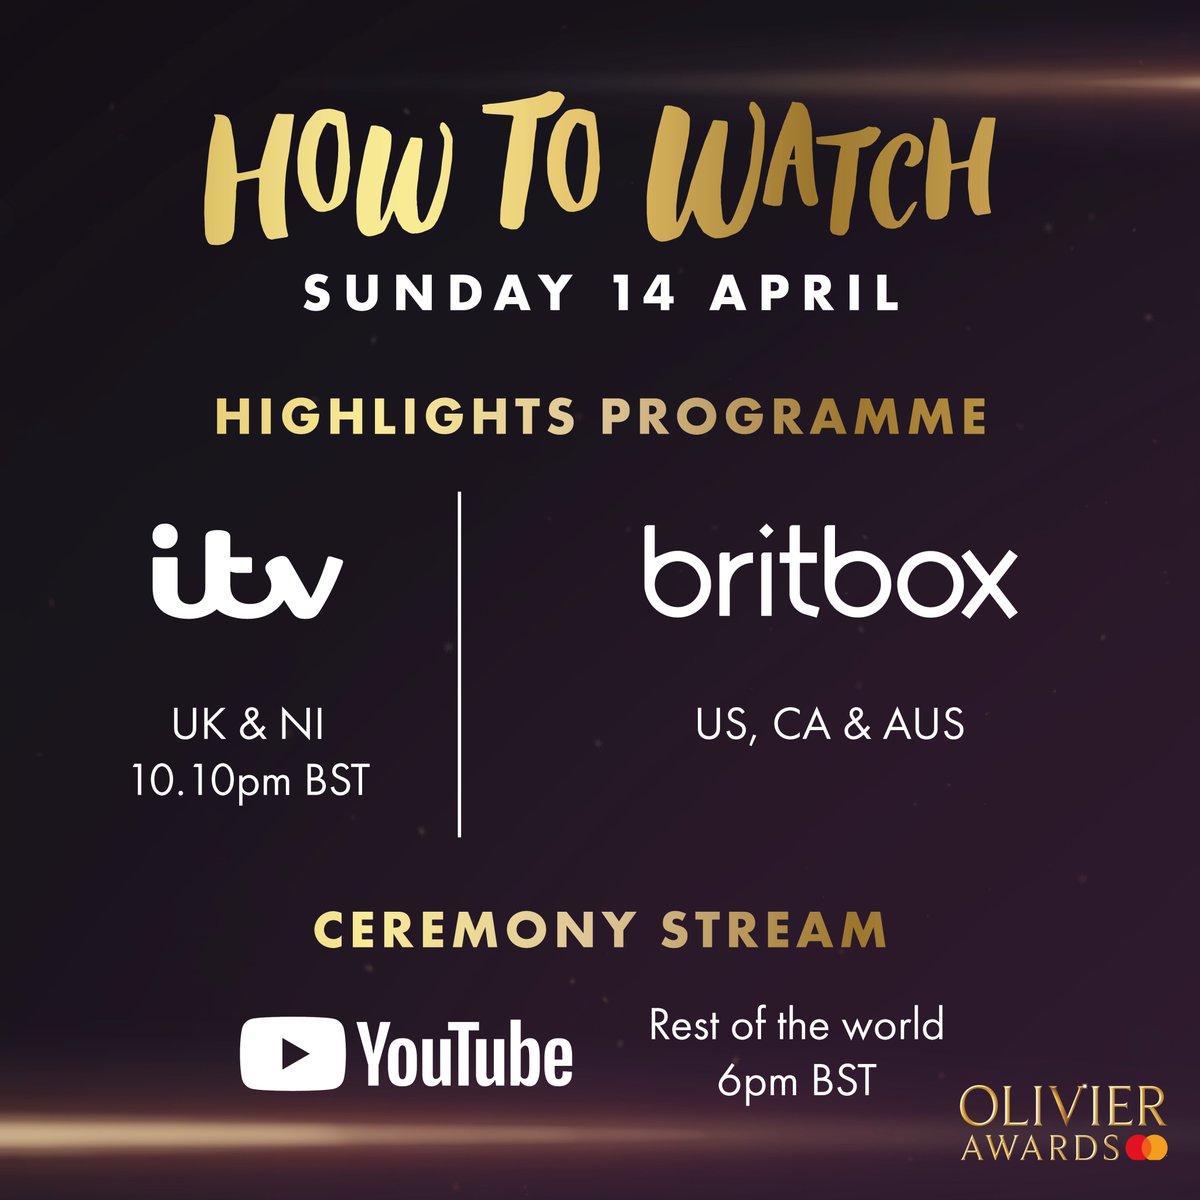 How to watch the #OlivierAwards this weekend, updated timings: ✨ UK & NI - Highlights programme on @ITV at 10.10pm BST ✨US, Canada & Australia - Highlights programme via BritBox. Timing TBC ✨ Rest of the world - Ceremony stream via @london_theatre @YouTube at 6pm BST